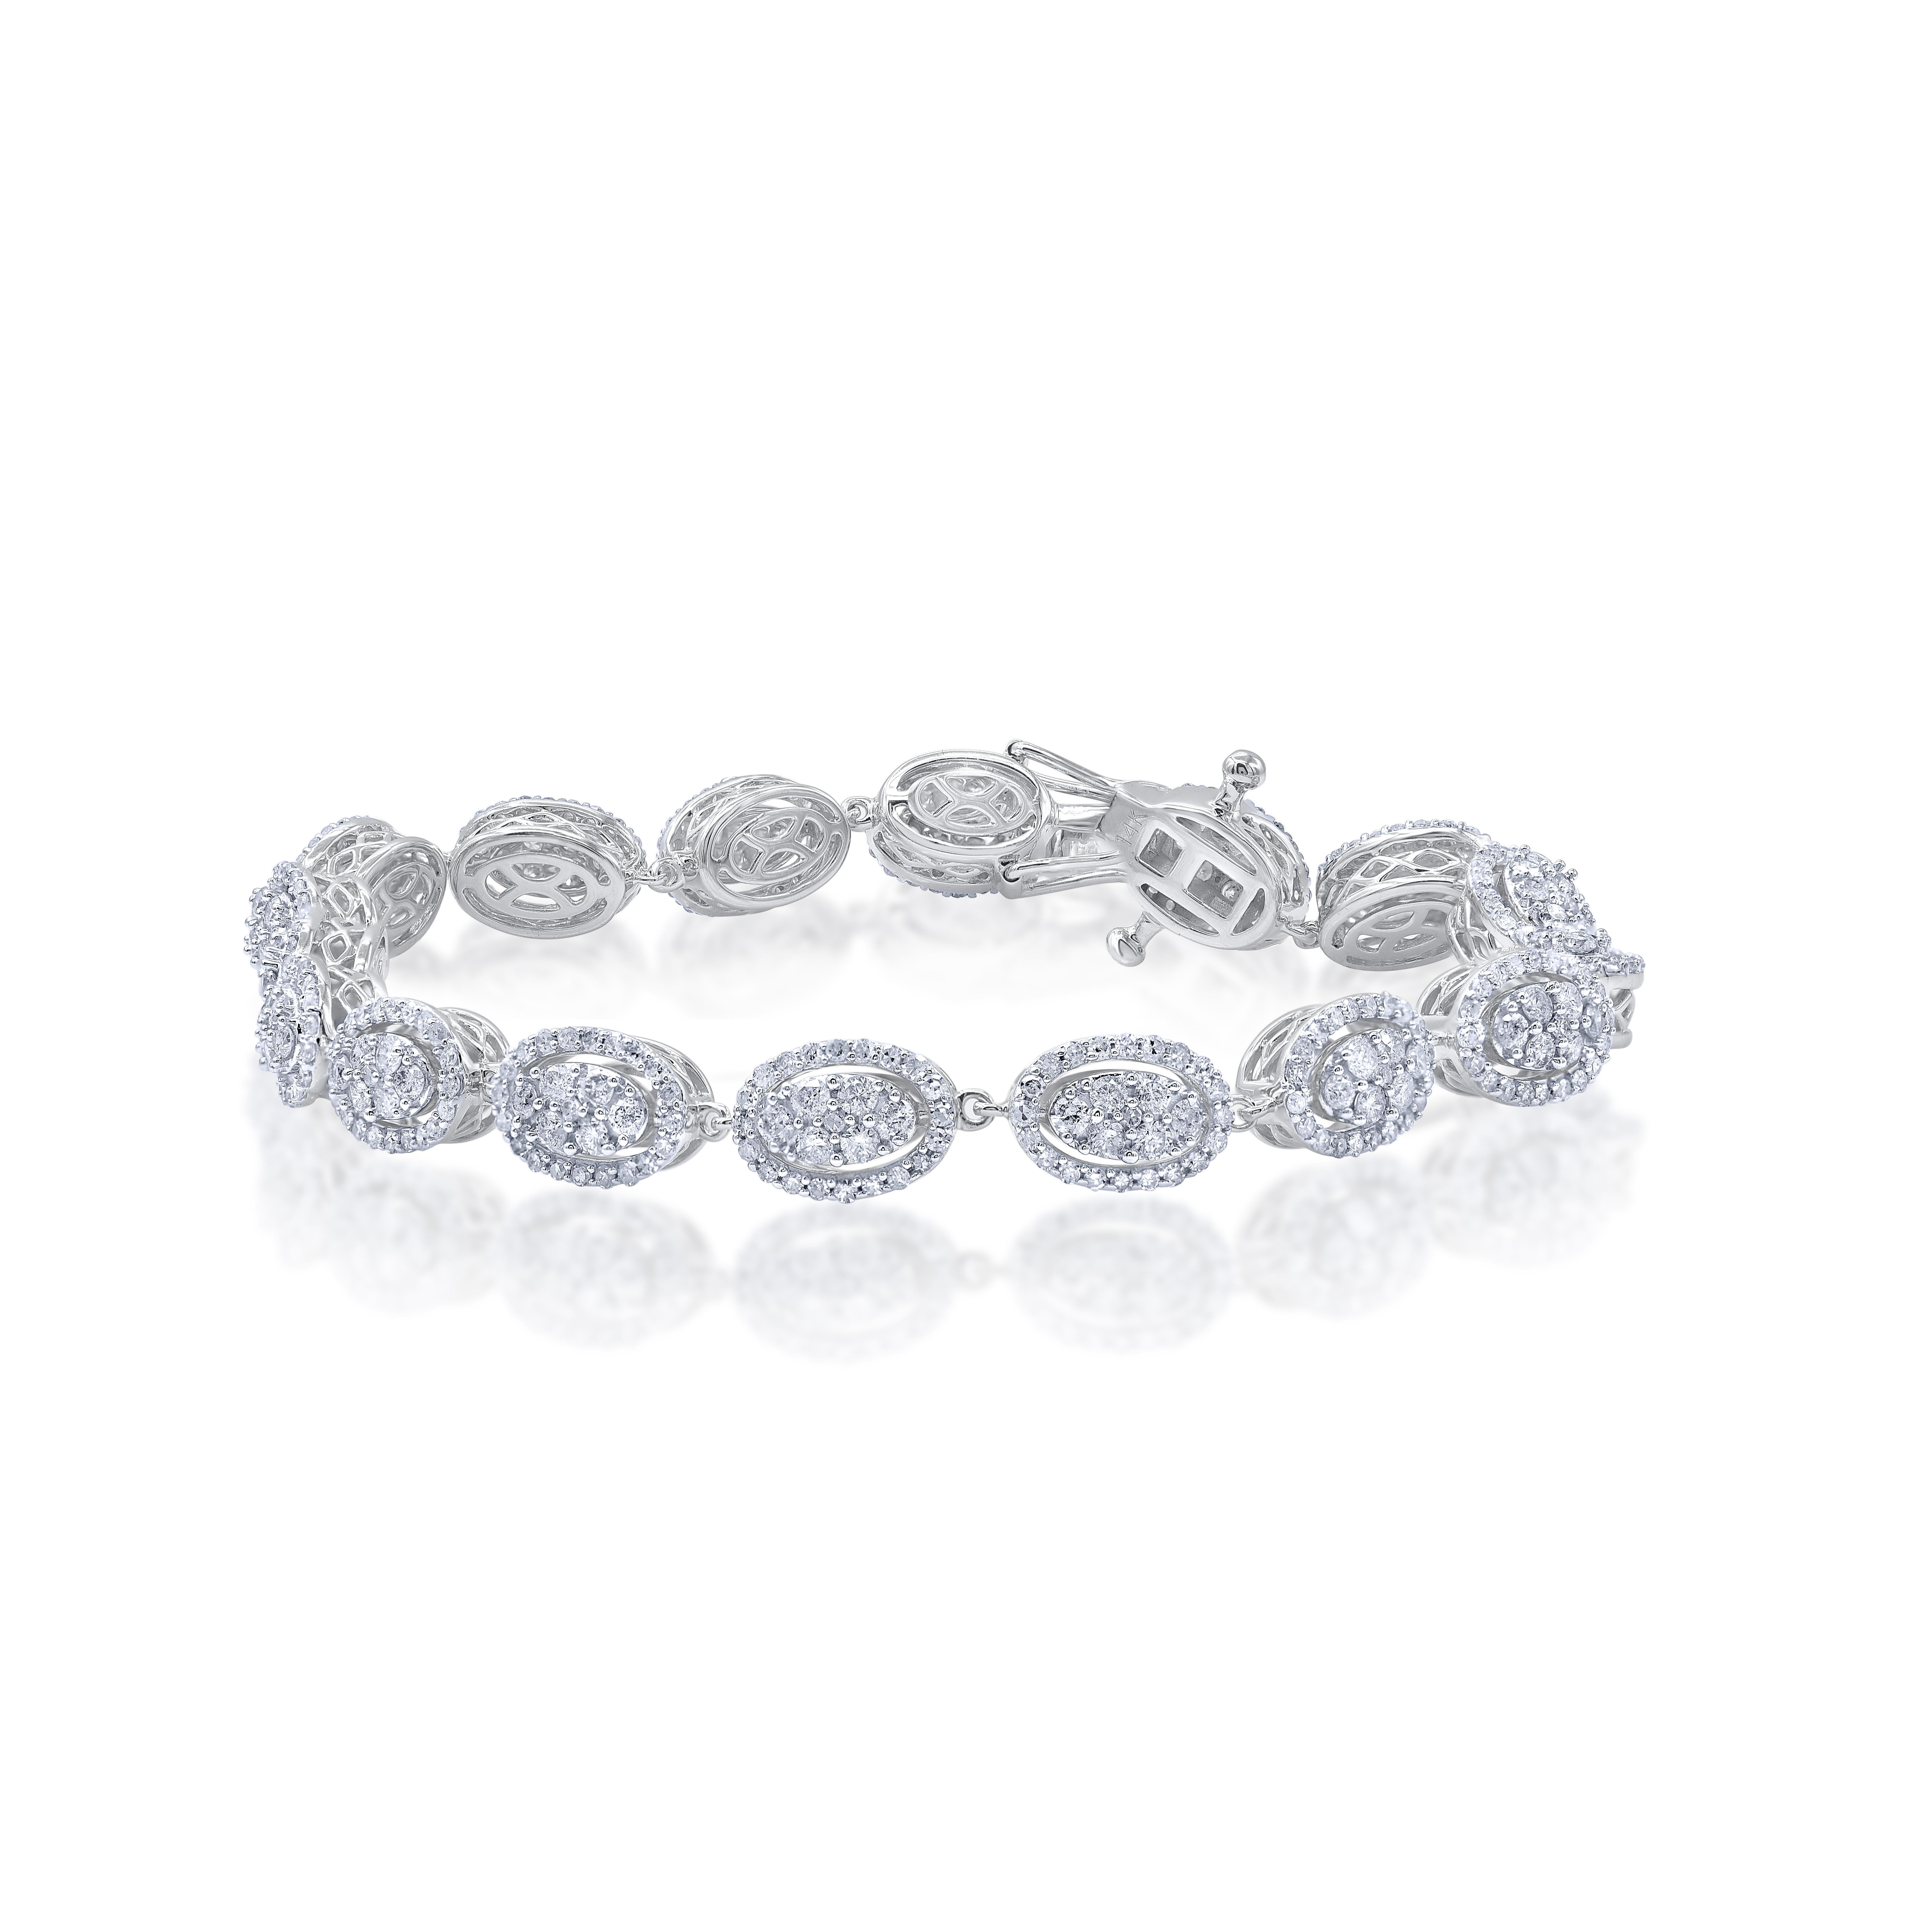 Look your dazzling best with this beautiful bracelet. This diamond bracelet features 459 natural single cut and brilliant cut diamonds in prong setting and crafted in 14 karat white gold. The total diamond weight is 3.0 carat. Diamonds are graded as